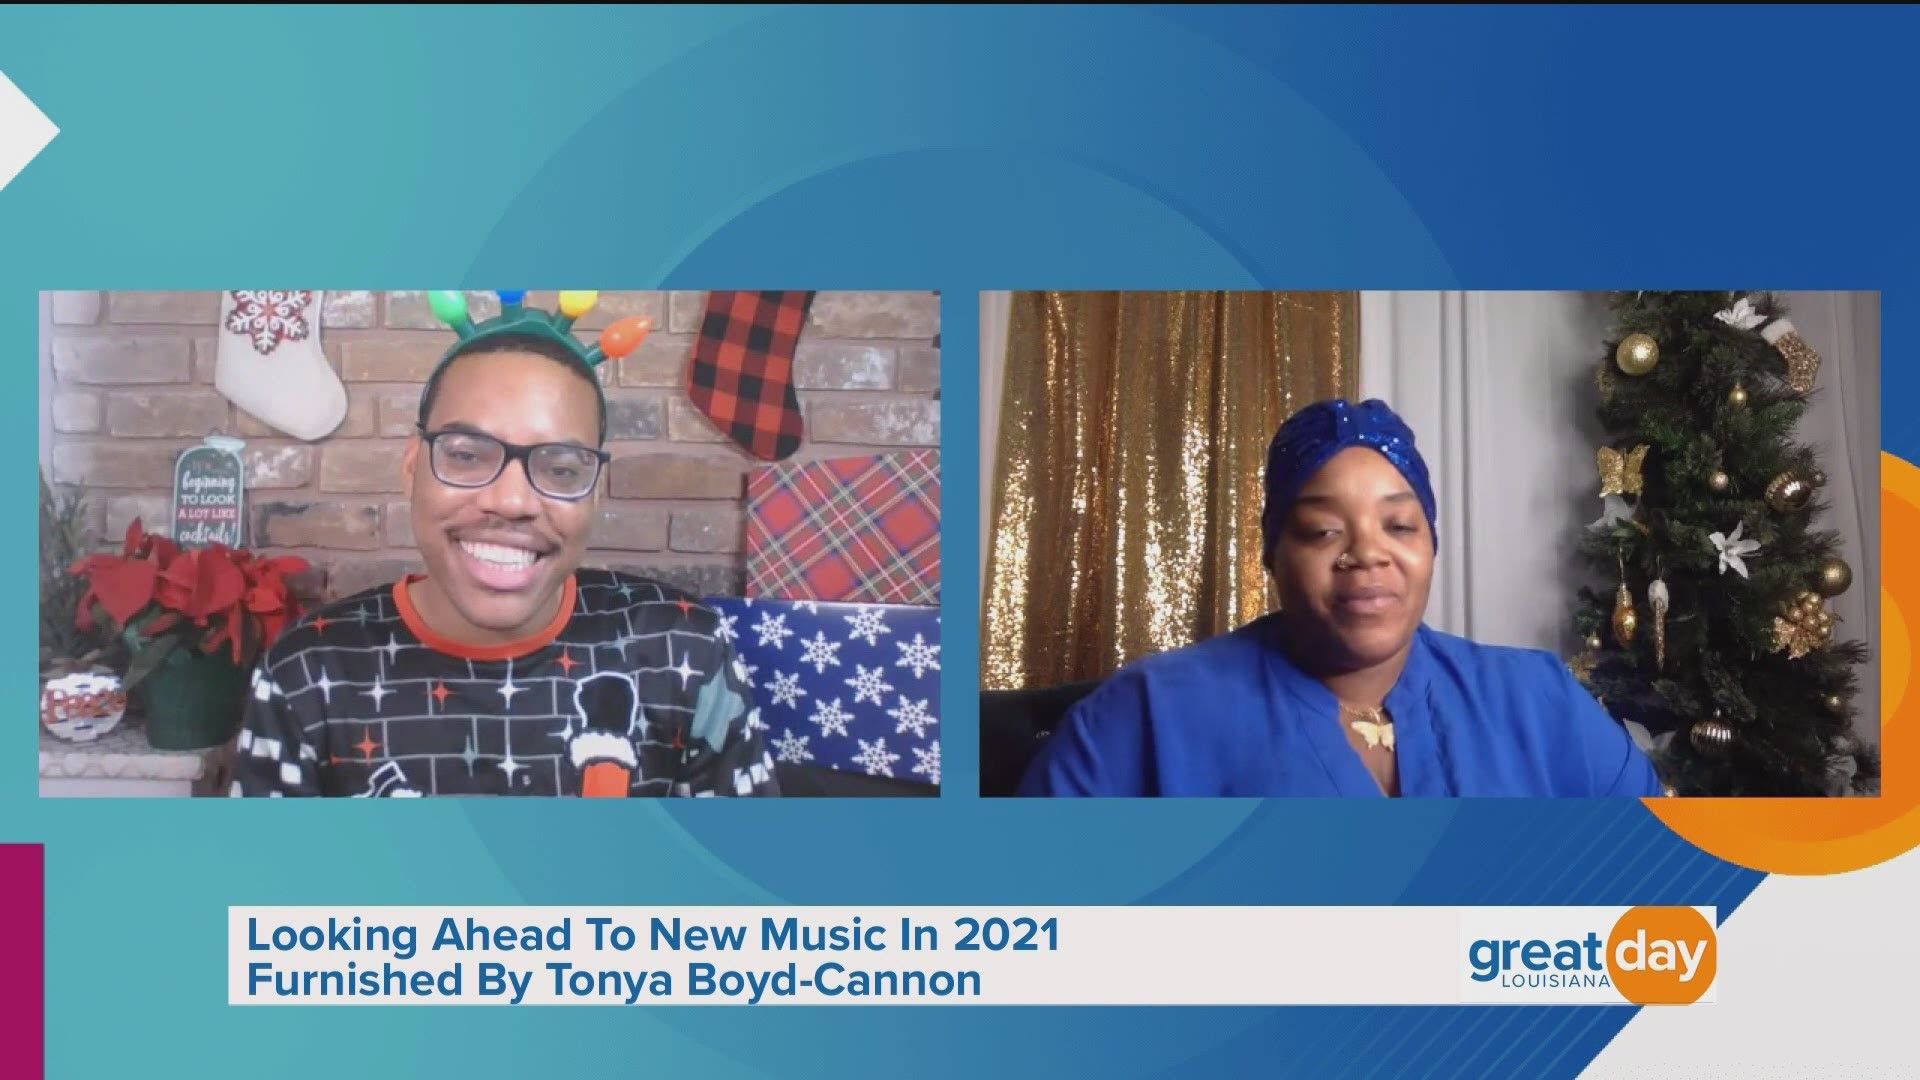 Singer Tonya Boyd-Cannon discussed new music and performed a holiday classic for Christmas Day.